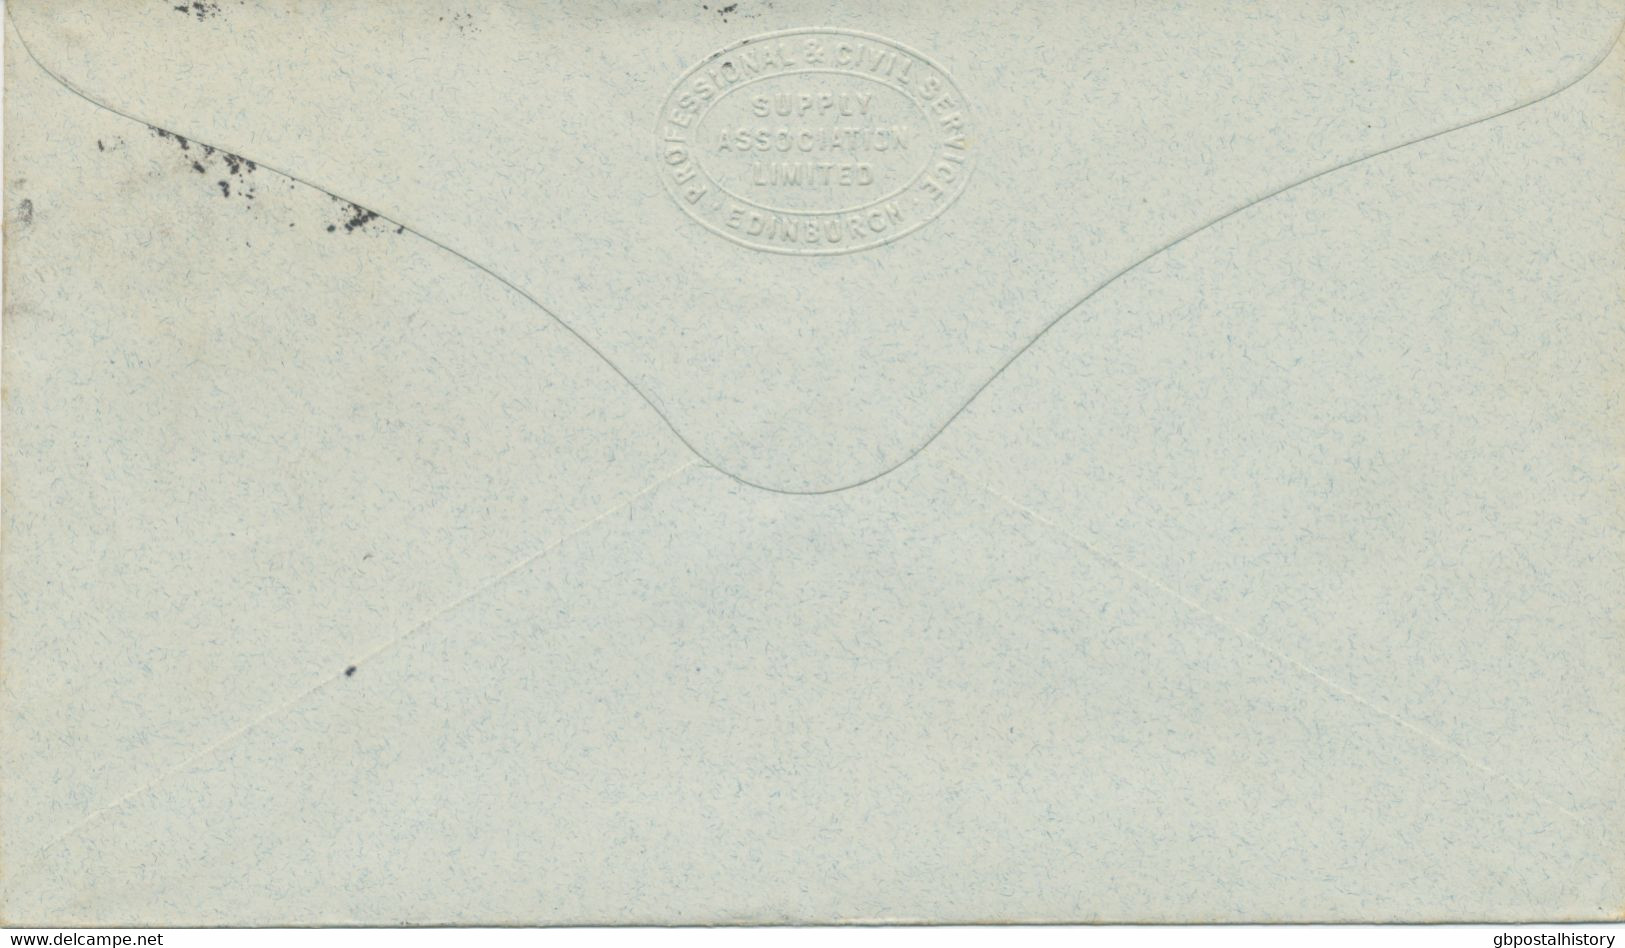 GB „EDINBURGH / 32“ Double Cirlce (29mm) Fine/very Fine QV ½d Embossed Stamped To Order Postal Stationery Envelope 1898 - Schotland